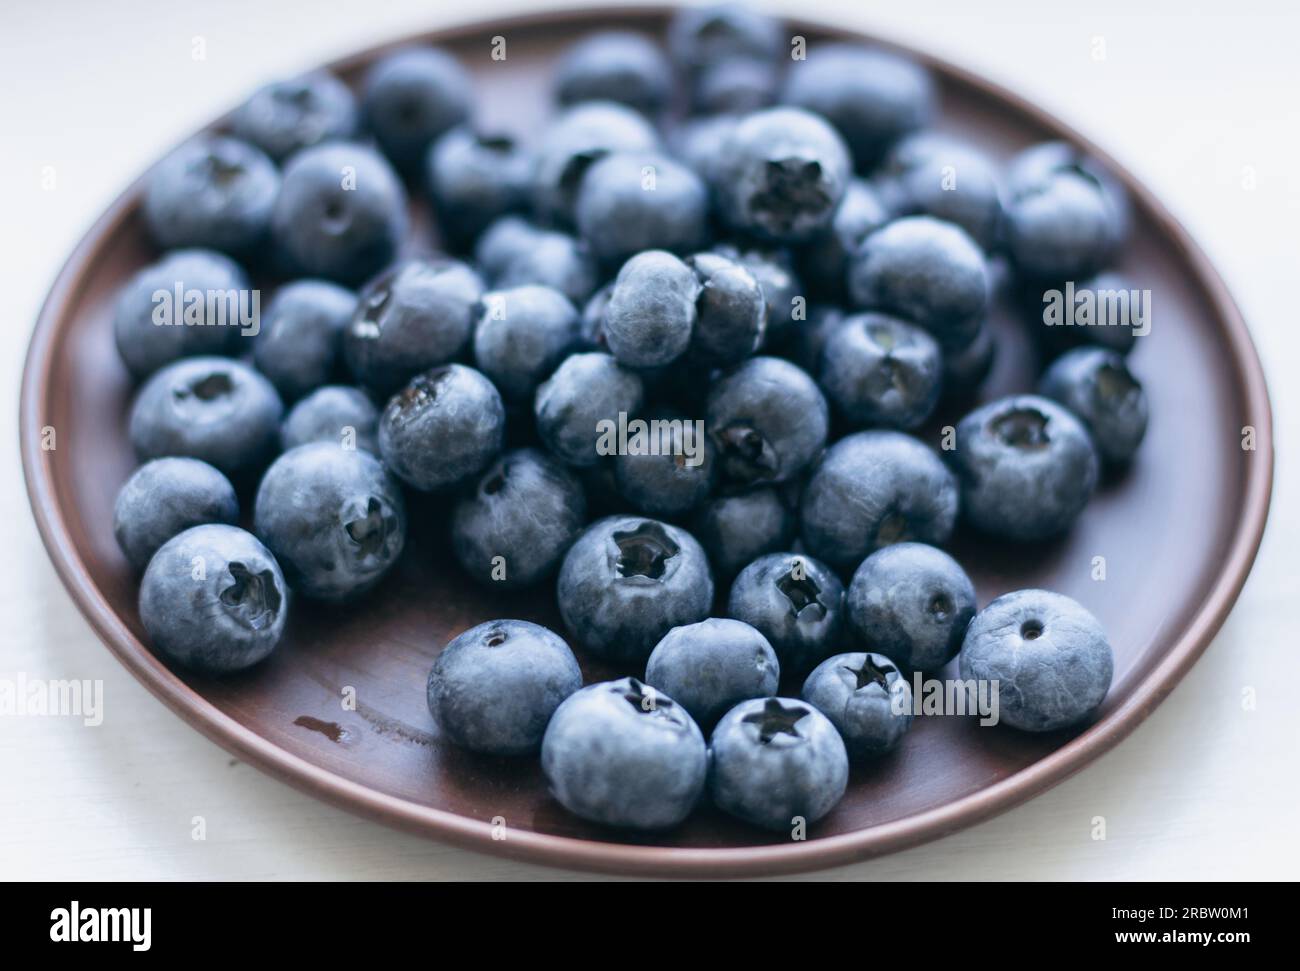 Blueberries on the plate. Blueberries in ceramic bowl on white background. Antioxidant berries. Raw food. Sweet ripe berries. Healthy dieting. Stock Photo